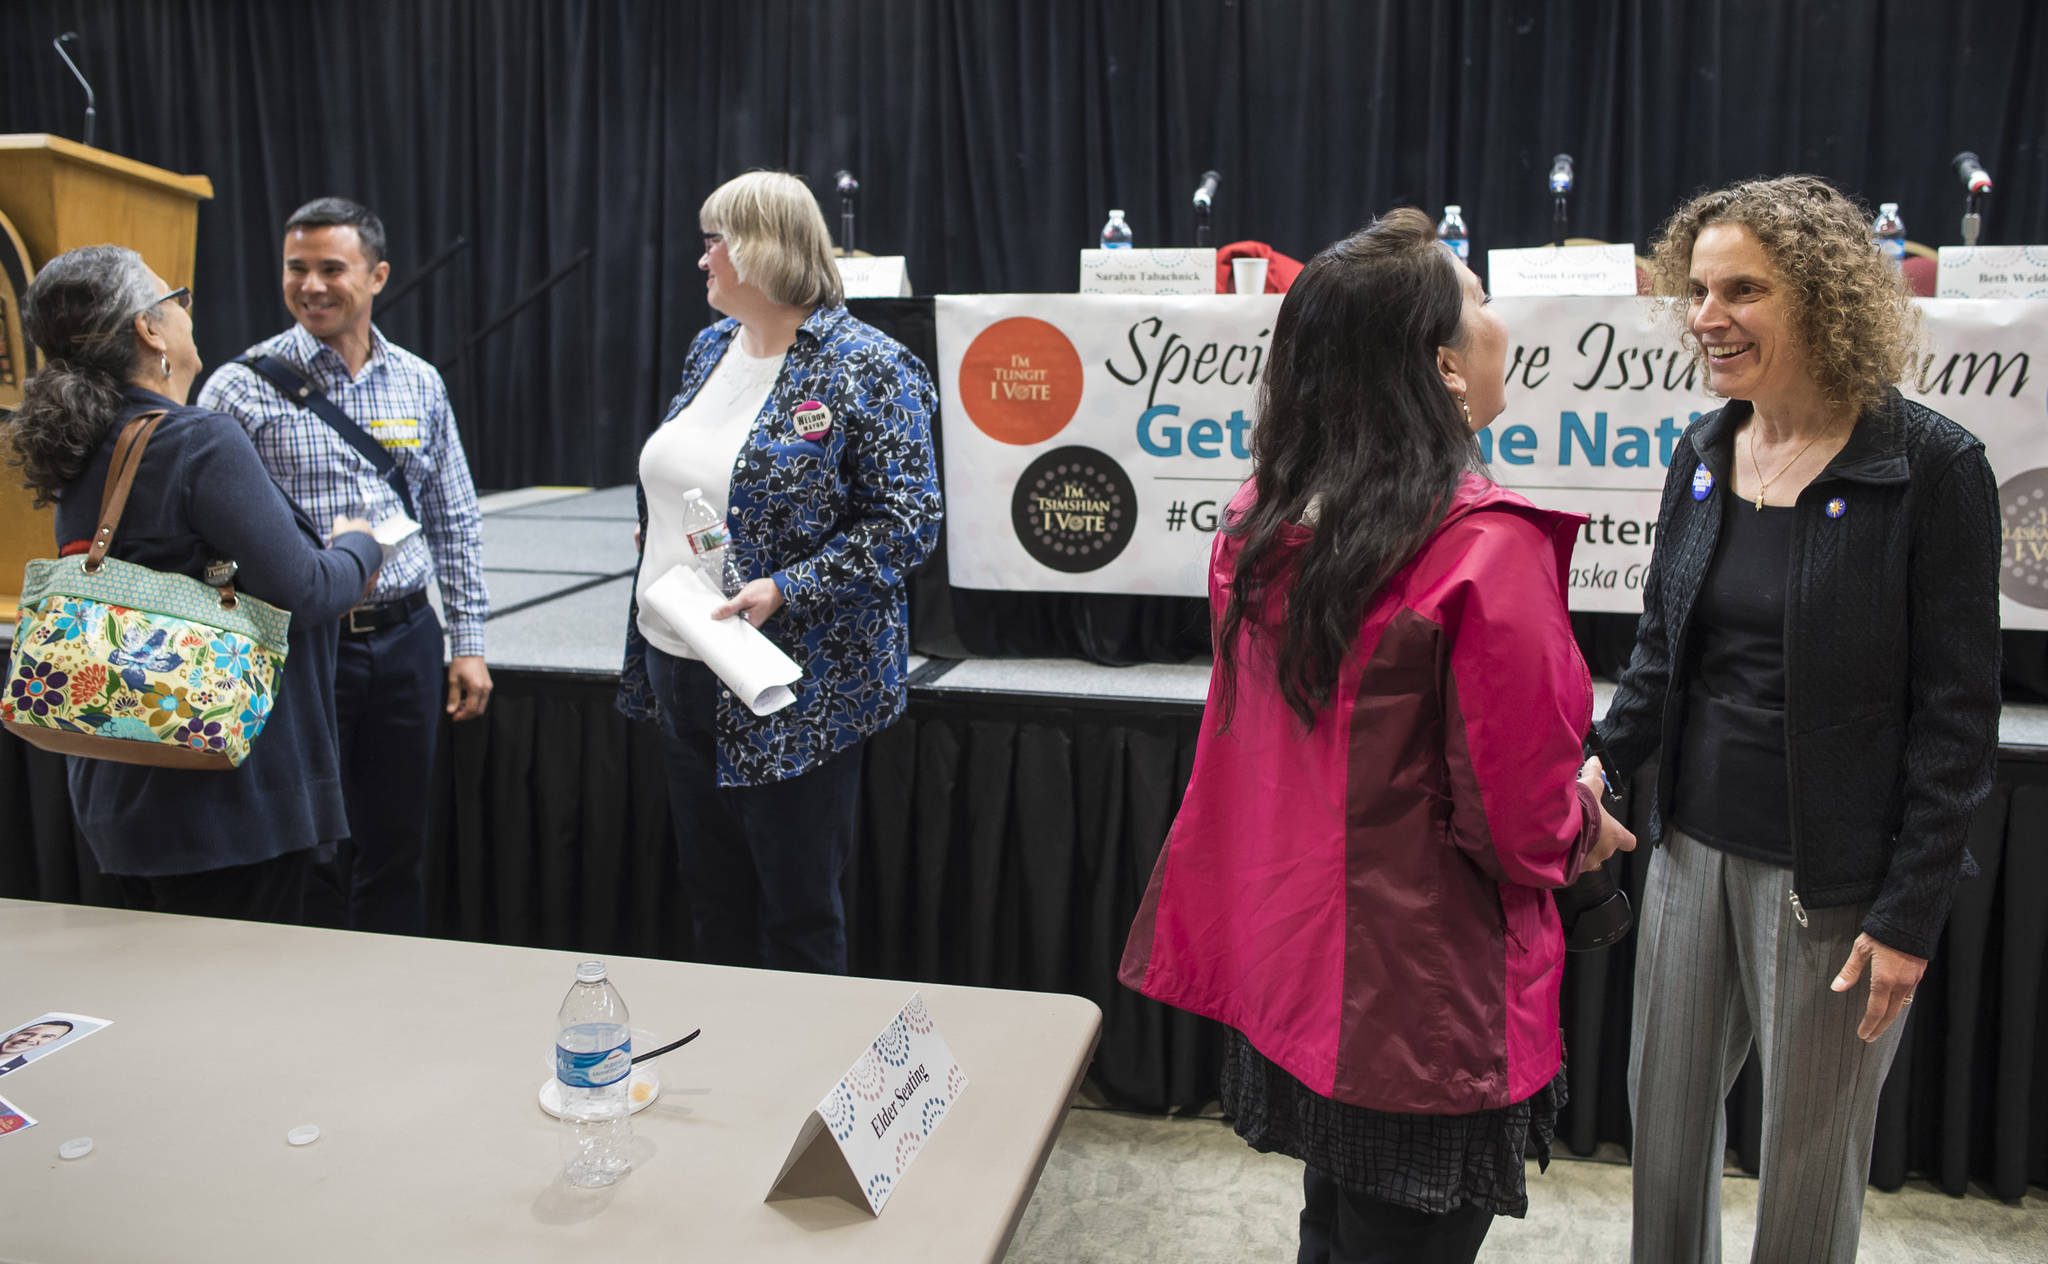 Mayoral candidates Saralyn Tabachnick, right, Gregory Norton, left, and Beth Weldon, center, speak to Juneau residents after a Special Native Issues Forum at the Elizabeth Peratrovich Hall on Tuesday, Sept. 18, 2018. (Michael Penn | Juneau Empire)